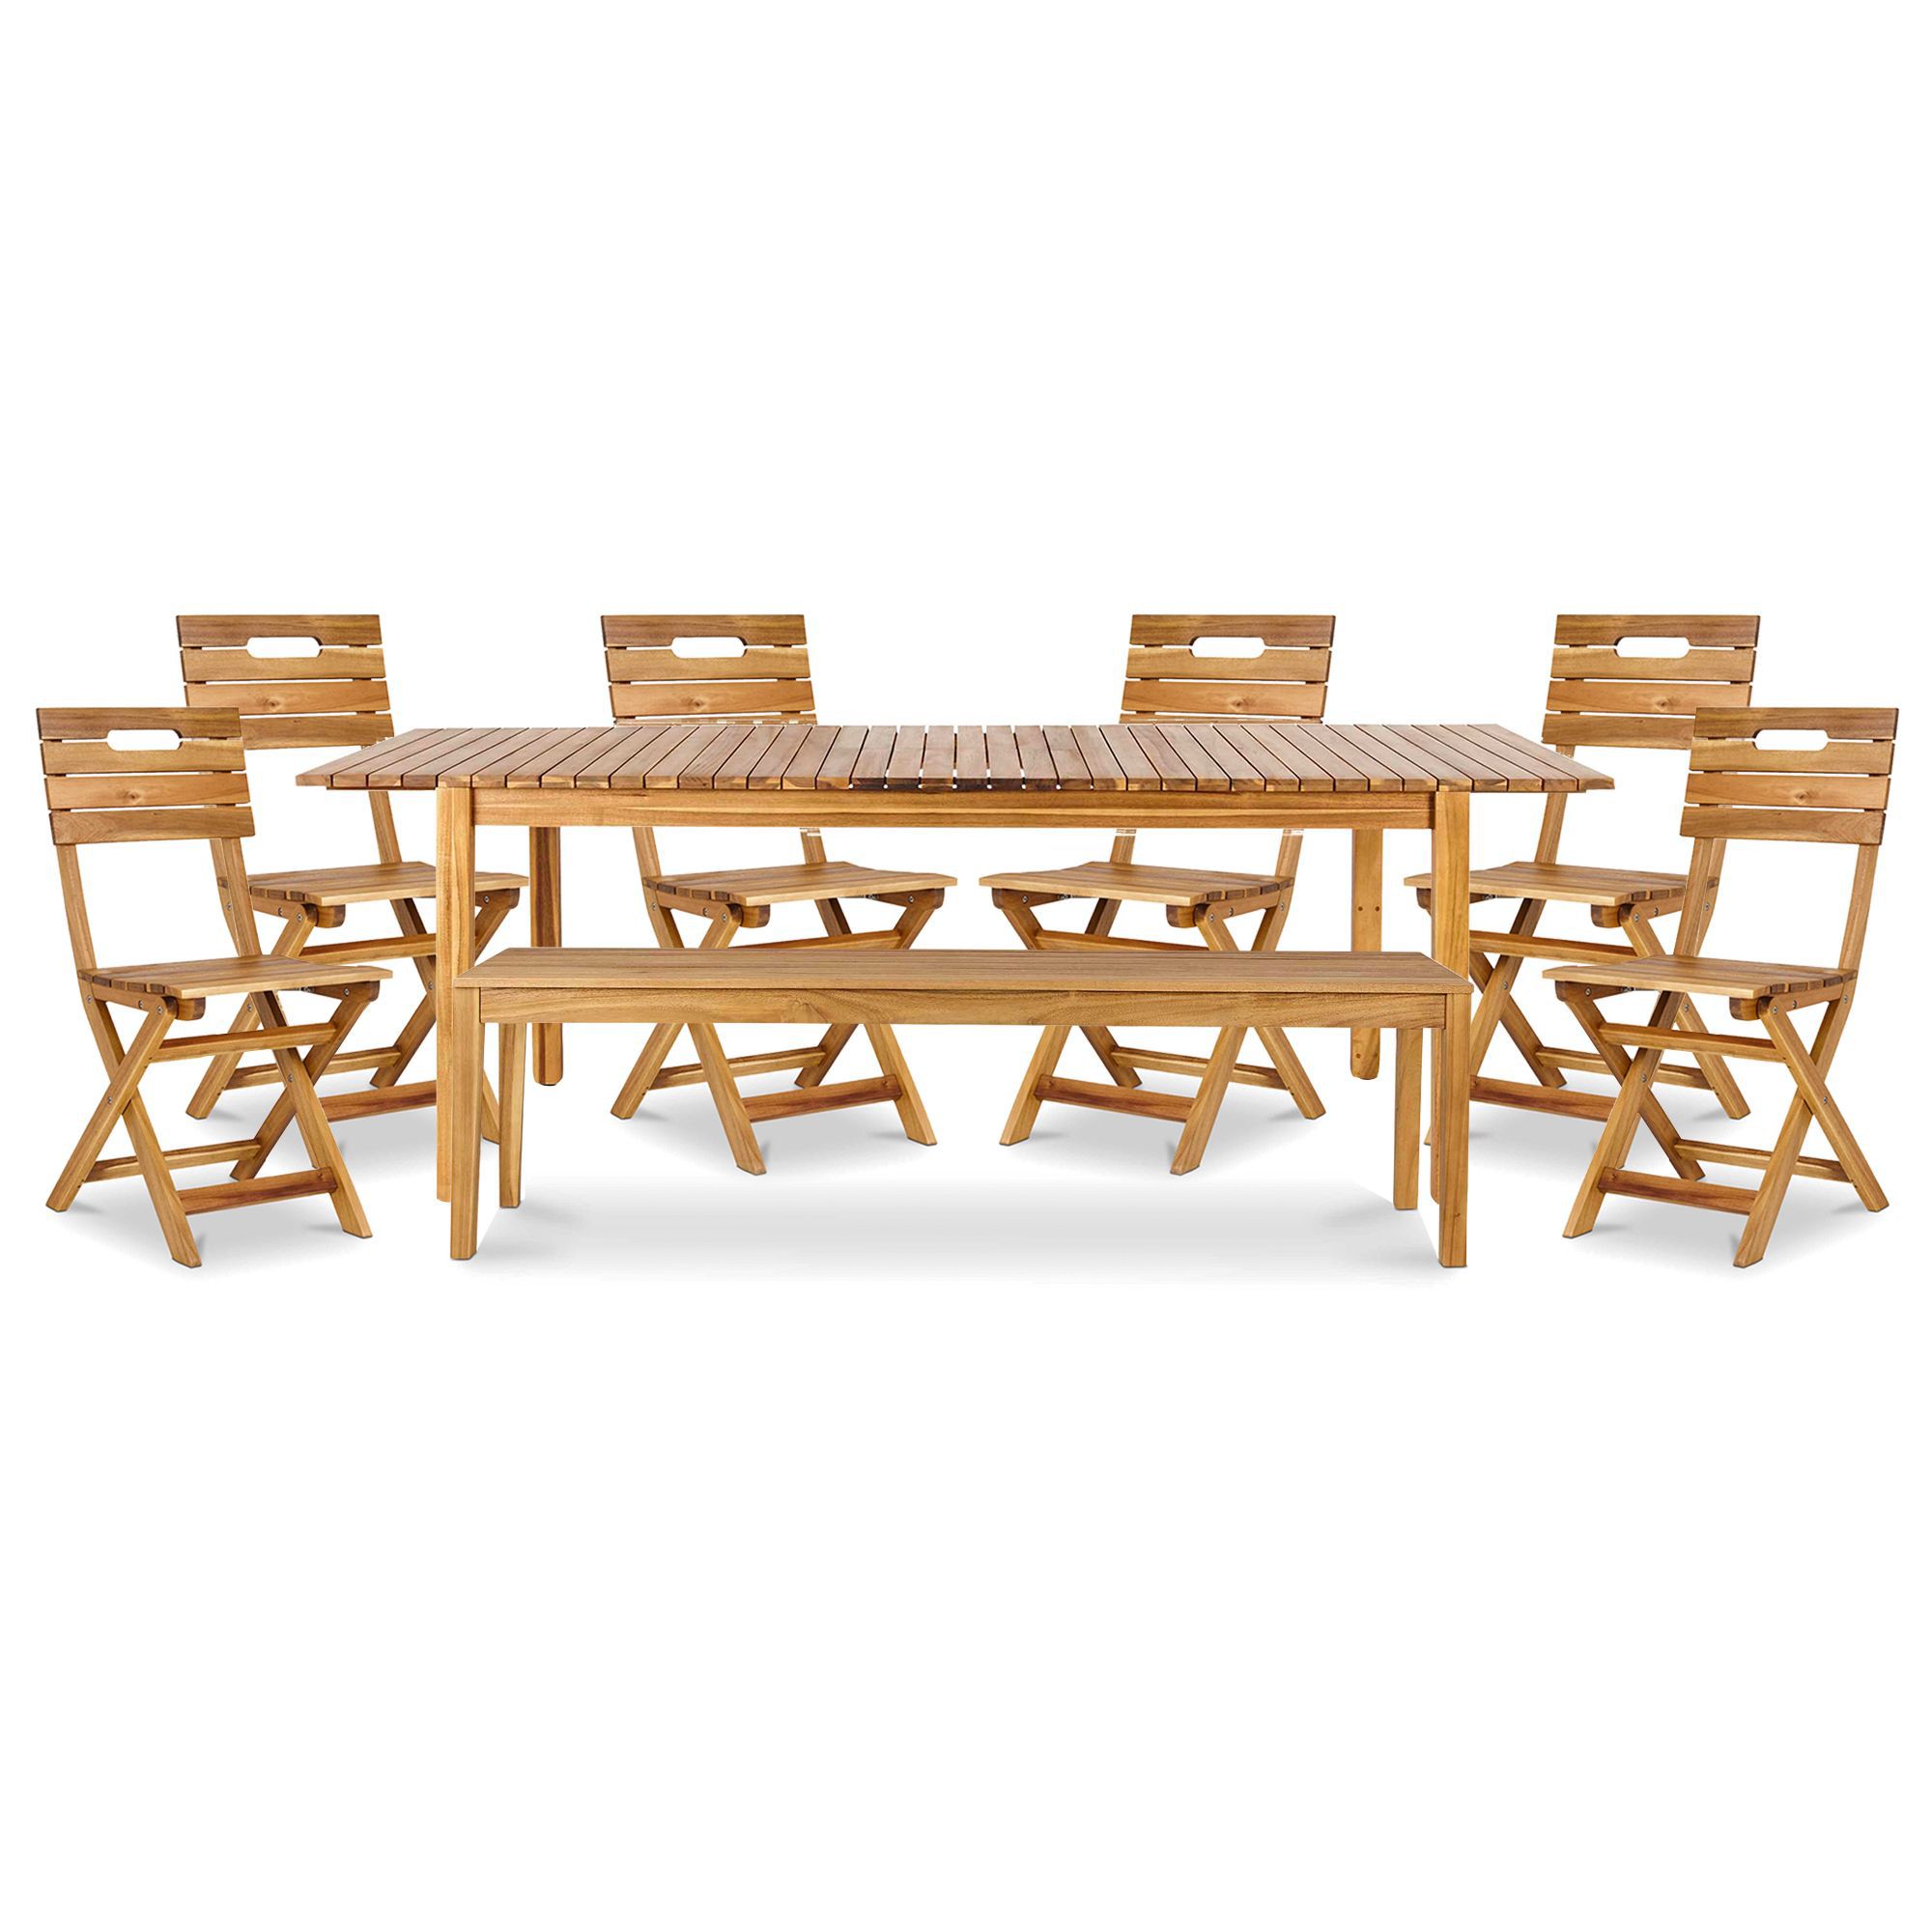 Denia Wooden 8 seater Dining set with Bench & standard chairs